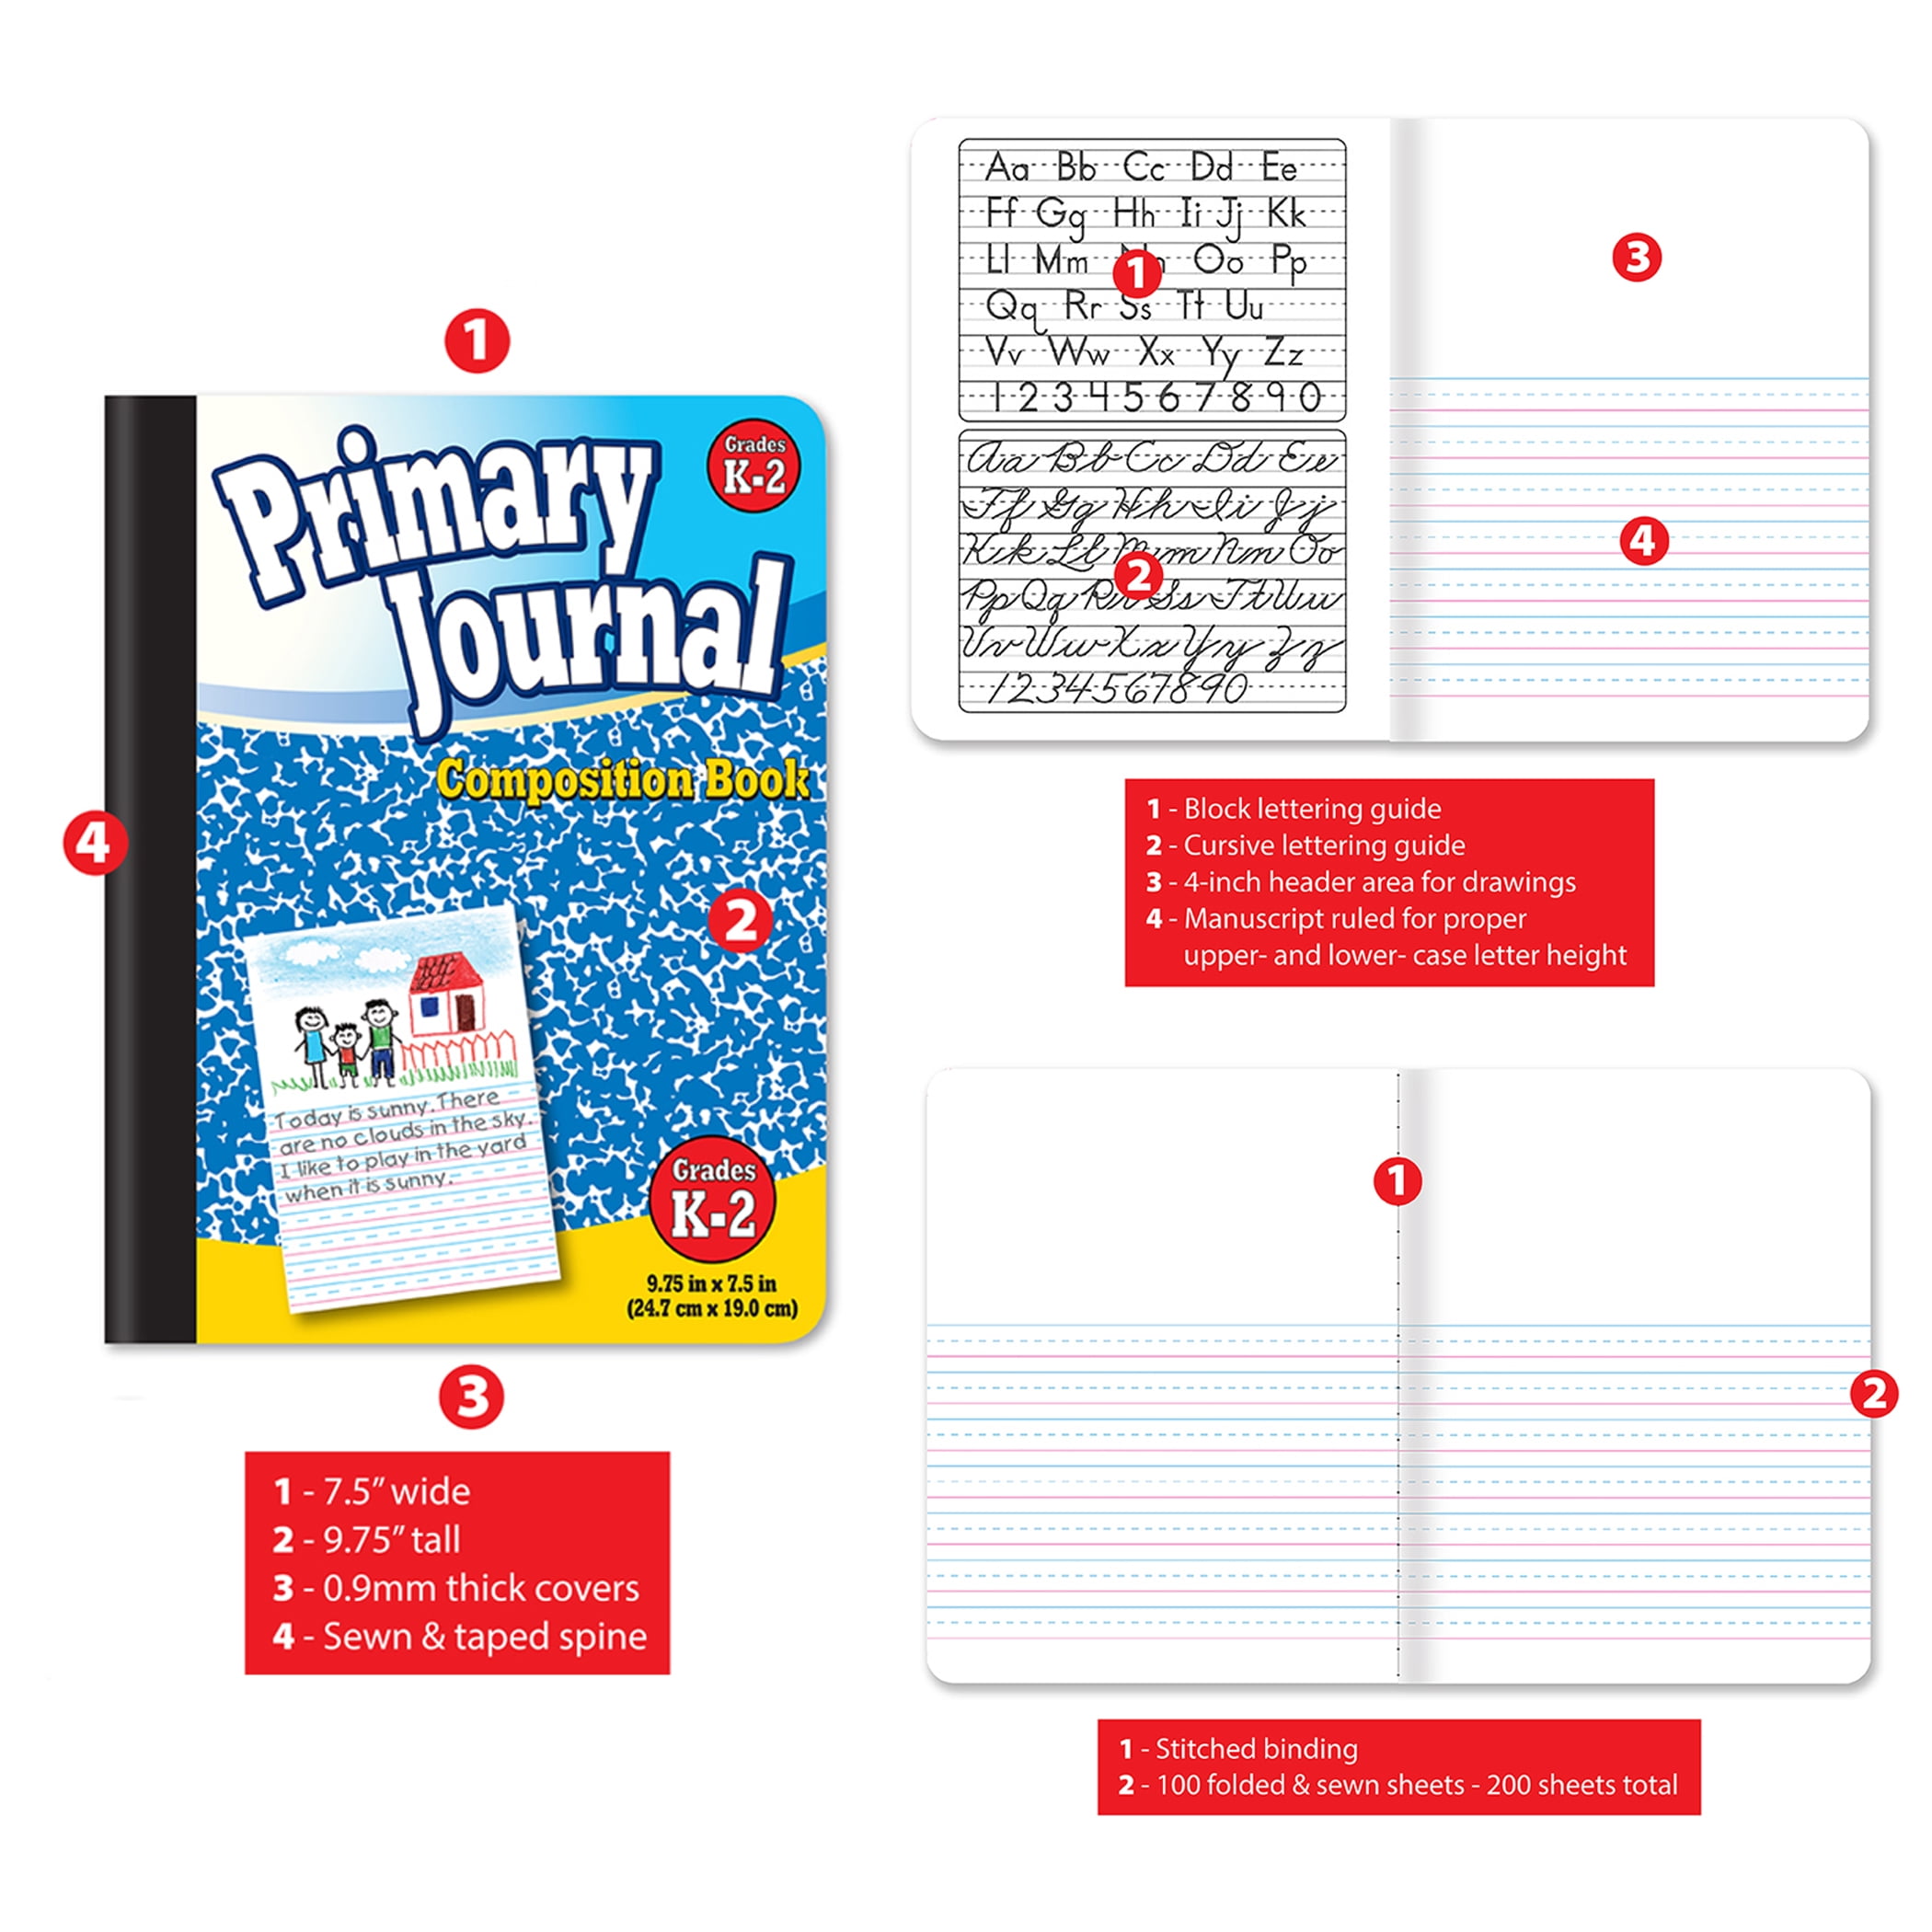 E-CLIPS USA Composition Notebooks, Primary Journal Composition